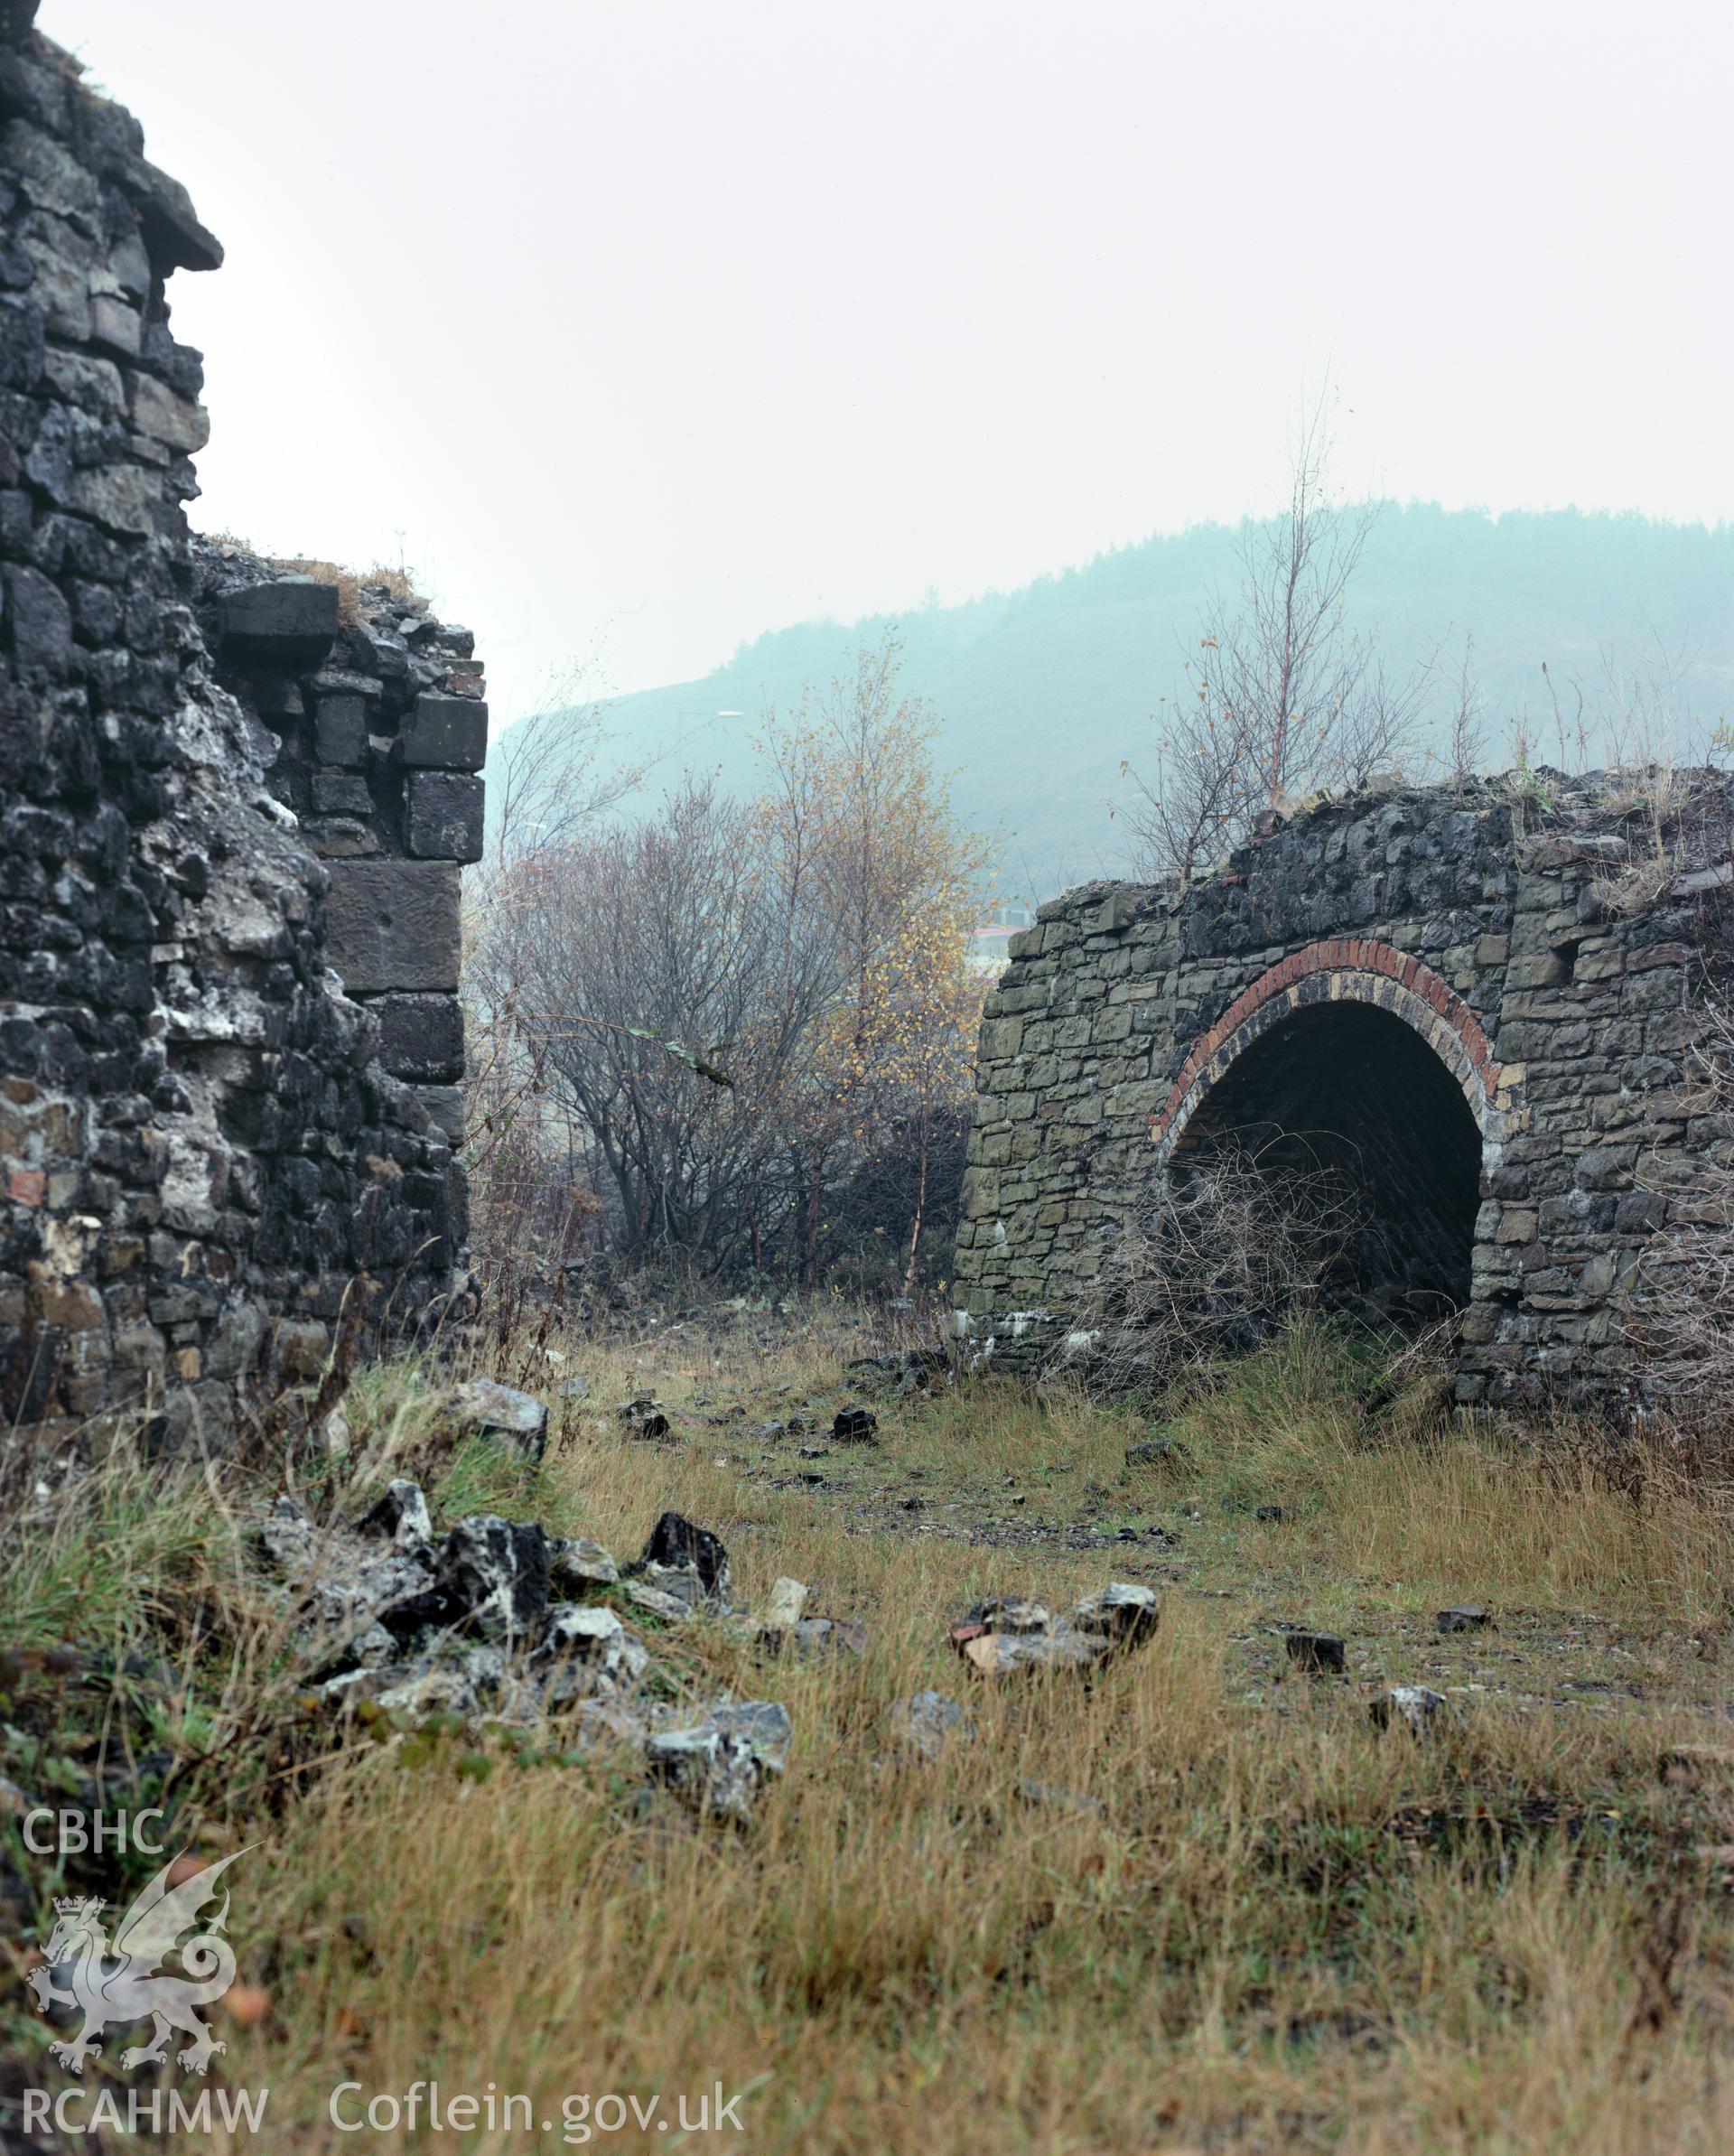 RCAHMW colour transparency showing the White Rock Copperworks, Swansea, taken by Iain Wright, c.1981